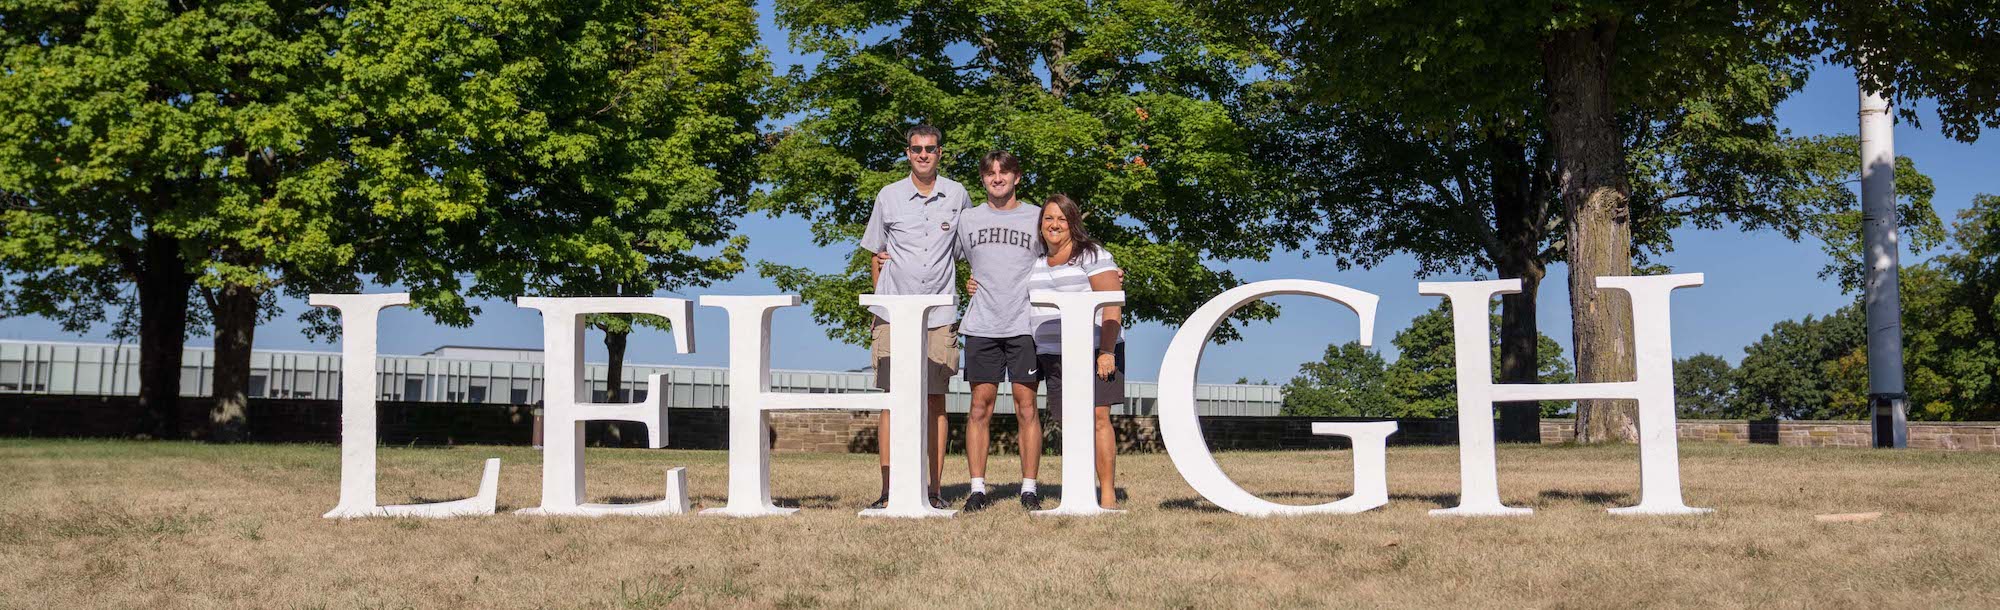 Two parents with a male student standing behind large white letters that spell LEHIGH